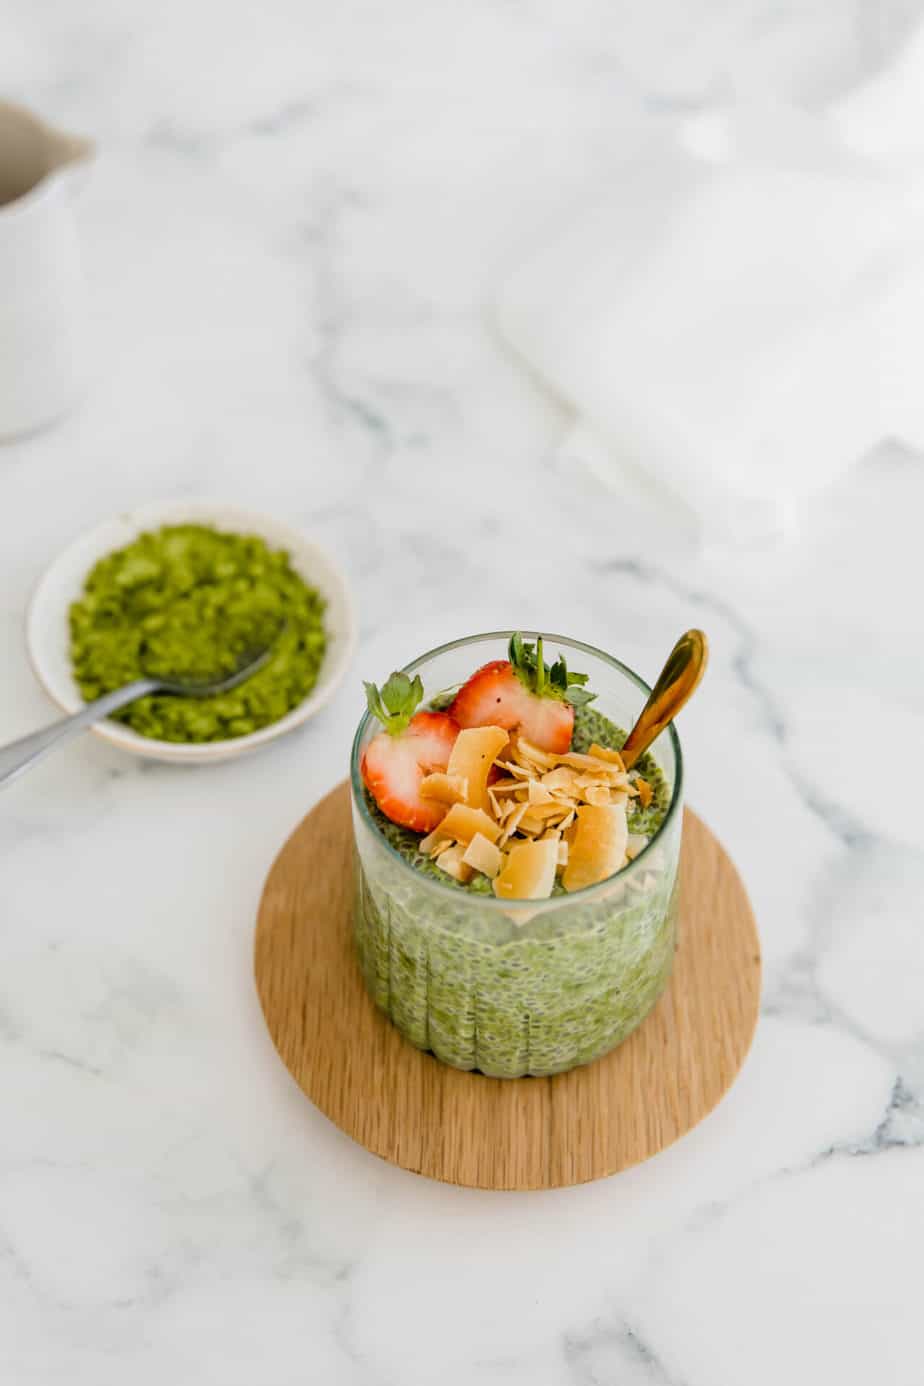 This creamy vegan strawberry matcha chia pudding is incredibly delicious and healthy. Made with matcha powder and fresh strawberries, it is packed with flavour and nutrients. So look no further if you're on the hunt for a new yummy snack or dessert to try out!  